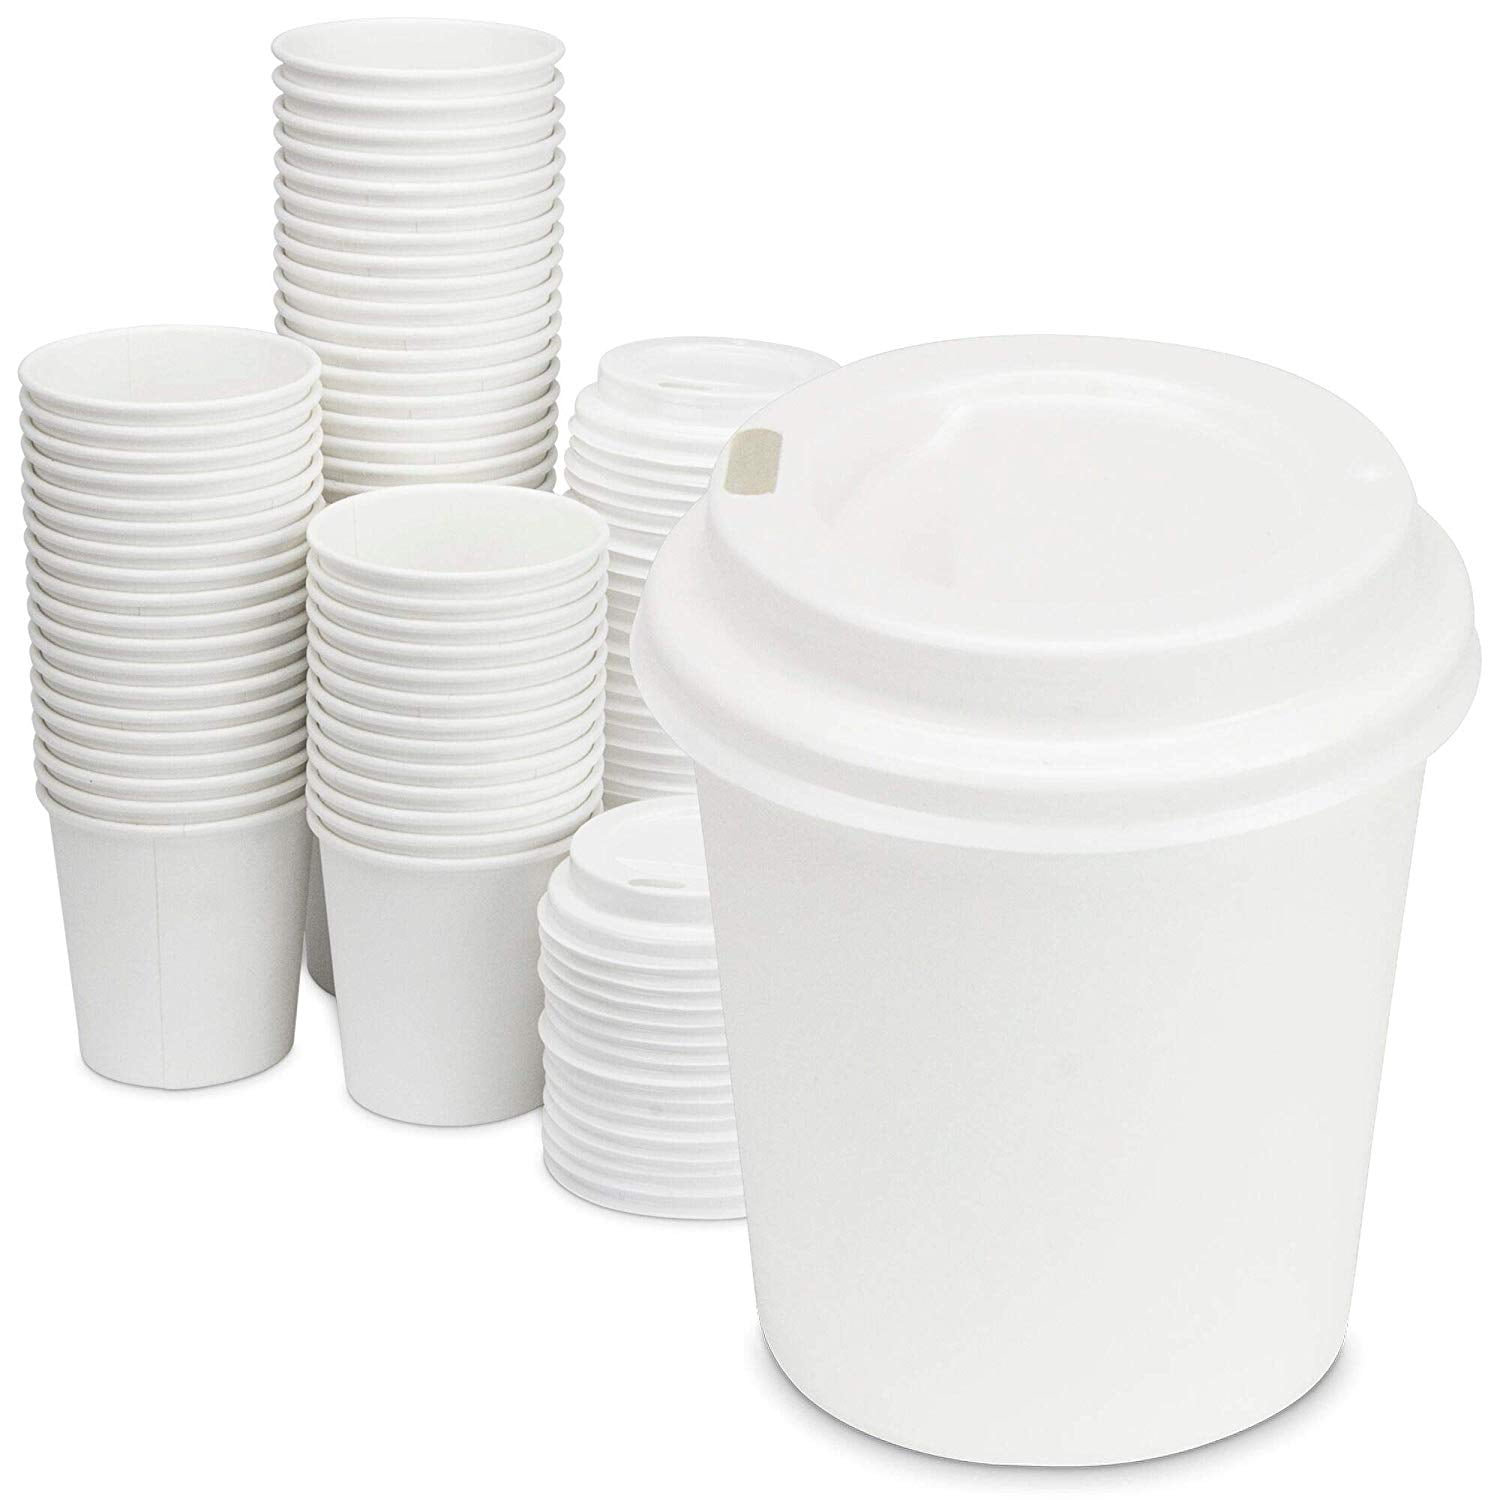 Details about   20oz Classic Durable Disposable Paper Cups & White Lids For Hot/Cold 